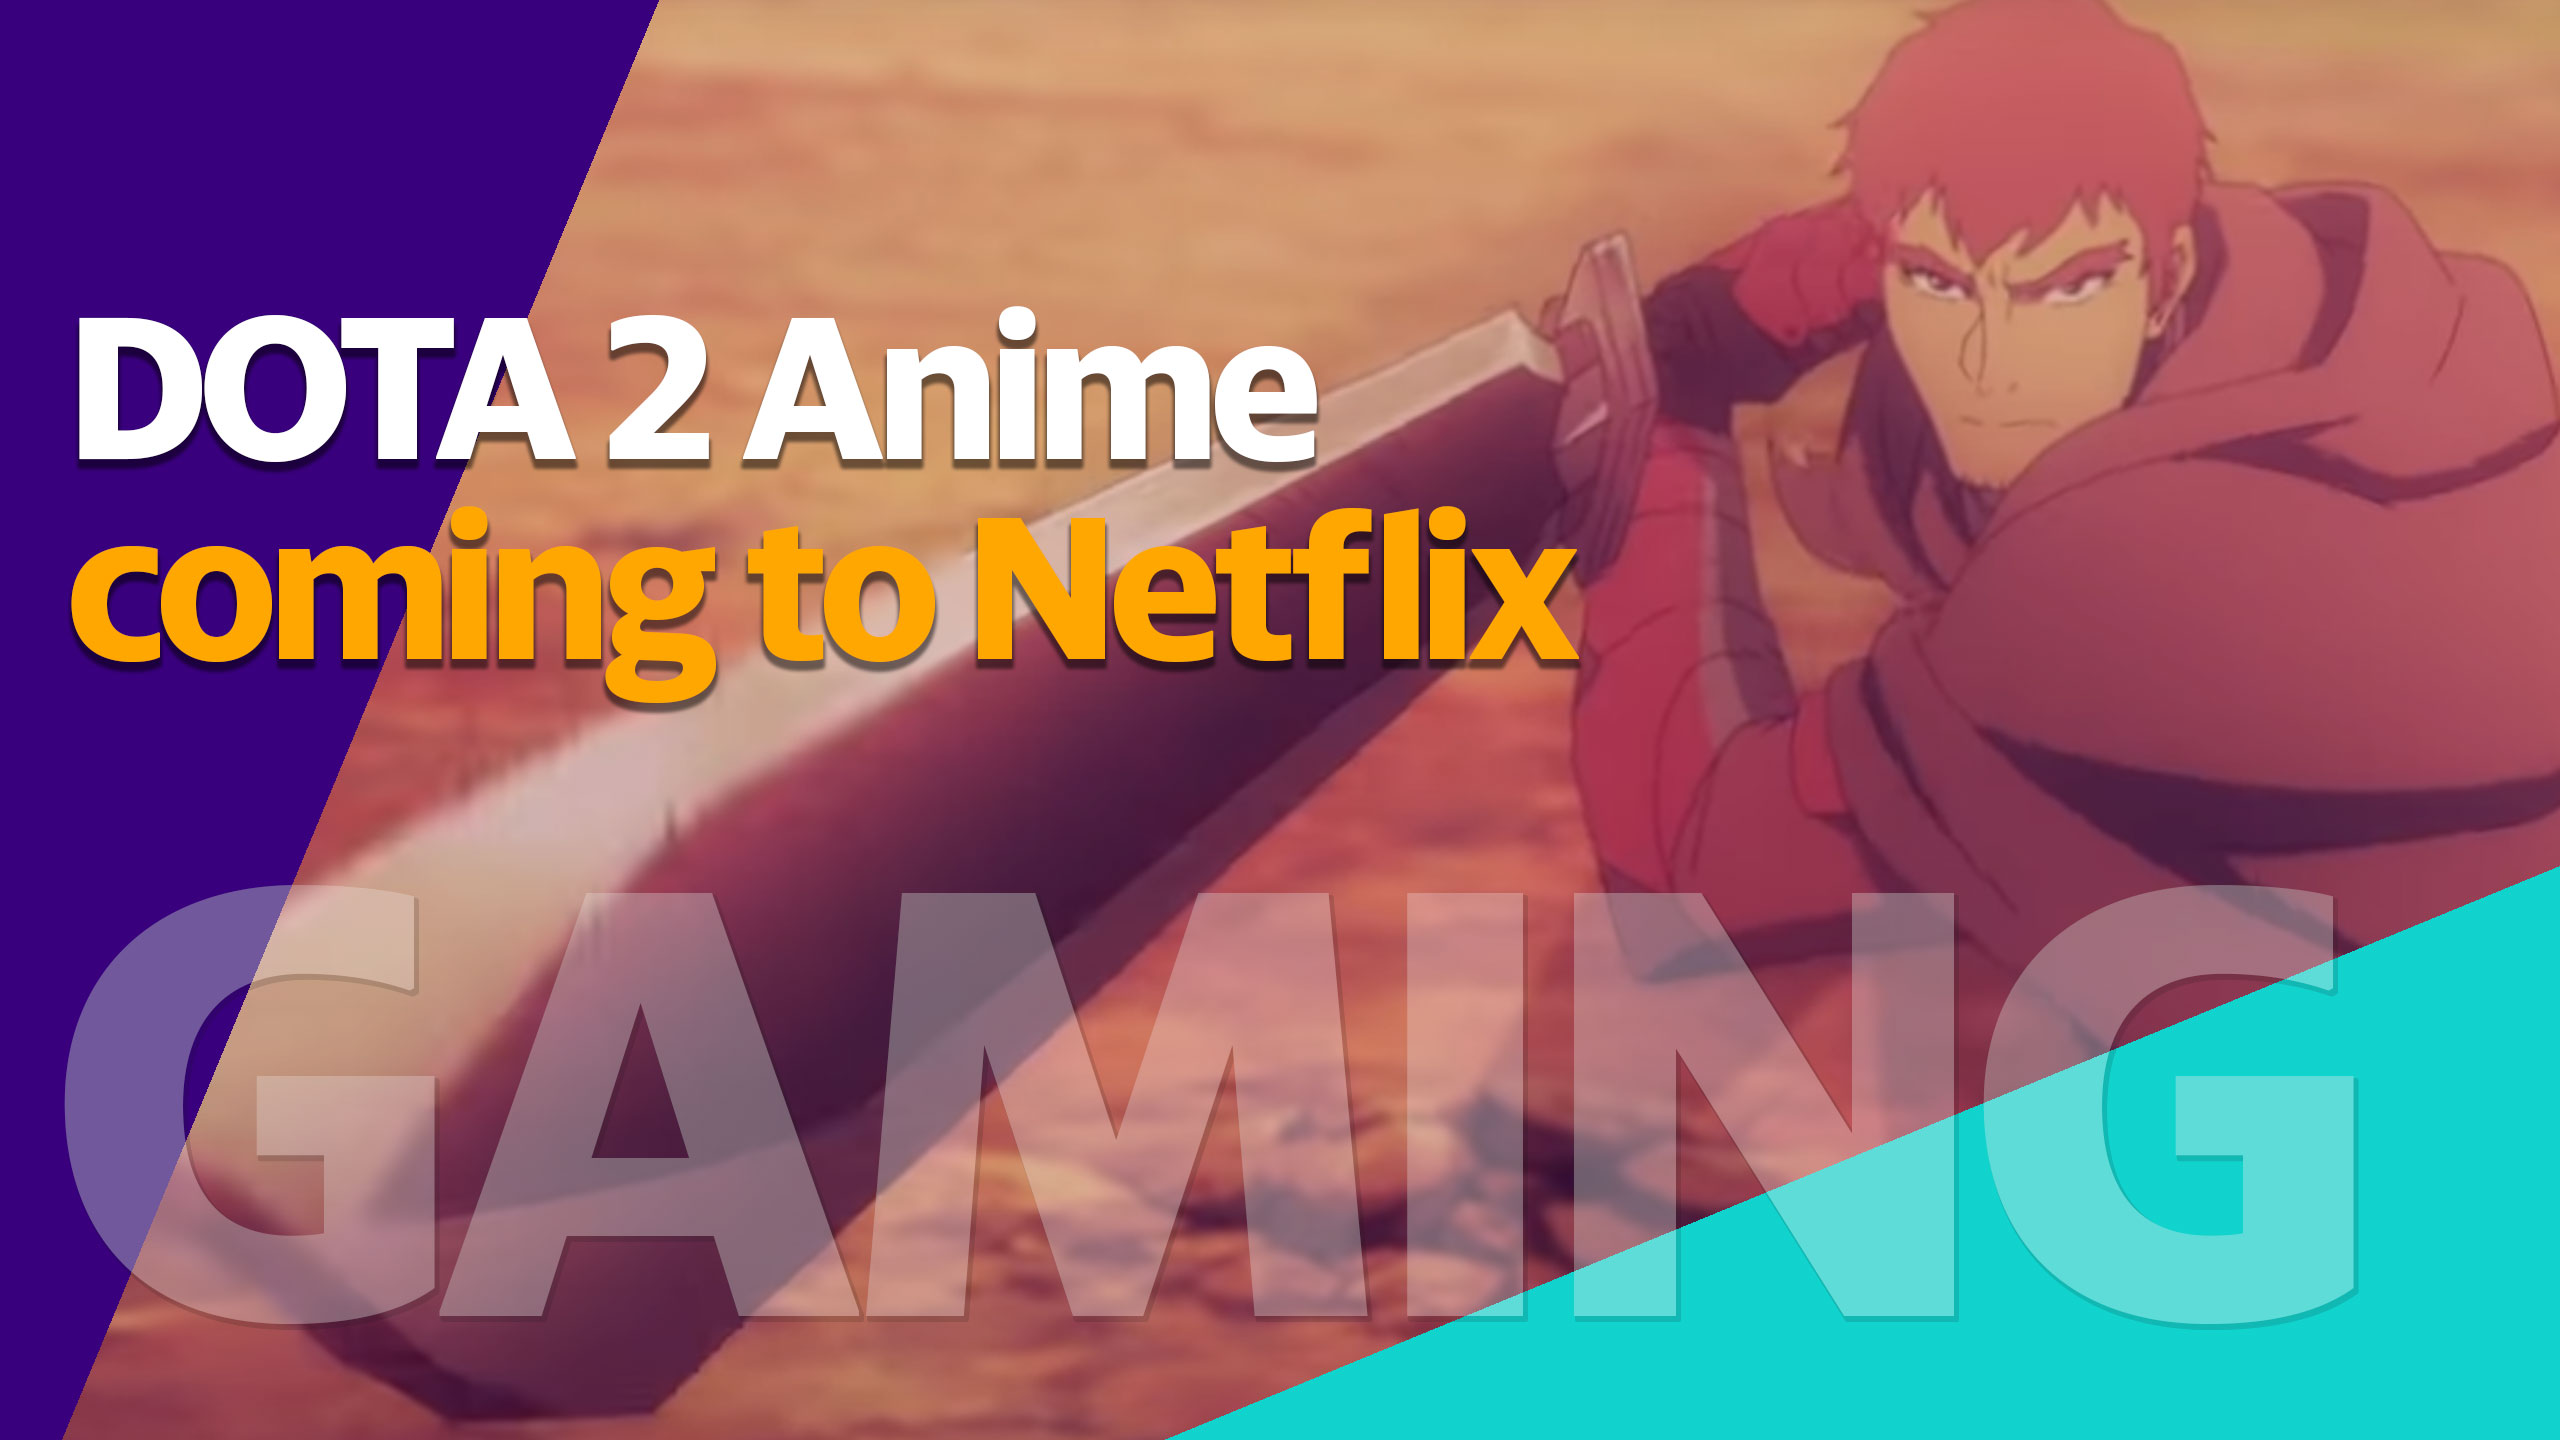 Anime Coming to Netflix in 2021 